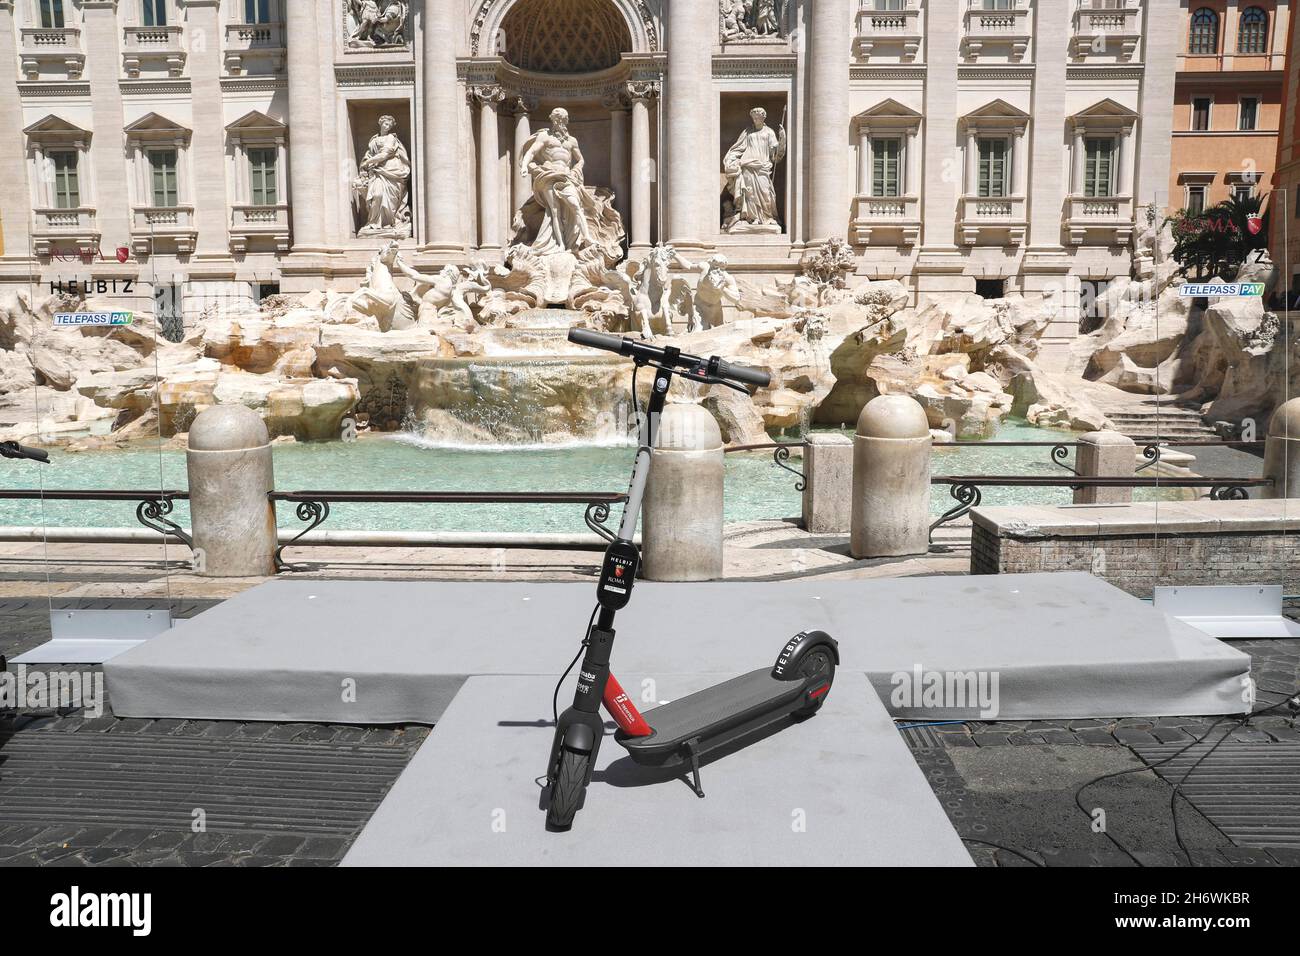 Italy, Rome, May 28, 2020 : Presentation of the new scooter service in sharing, during phase 2 contrast to coronavirus (COVID-19), at Trevi Fountain. Stock Photo